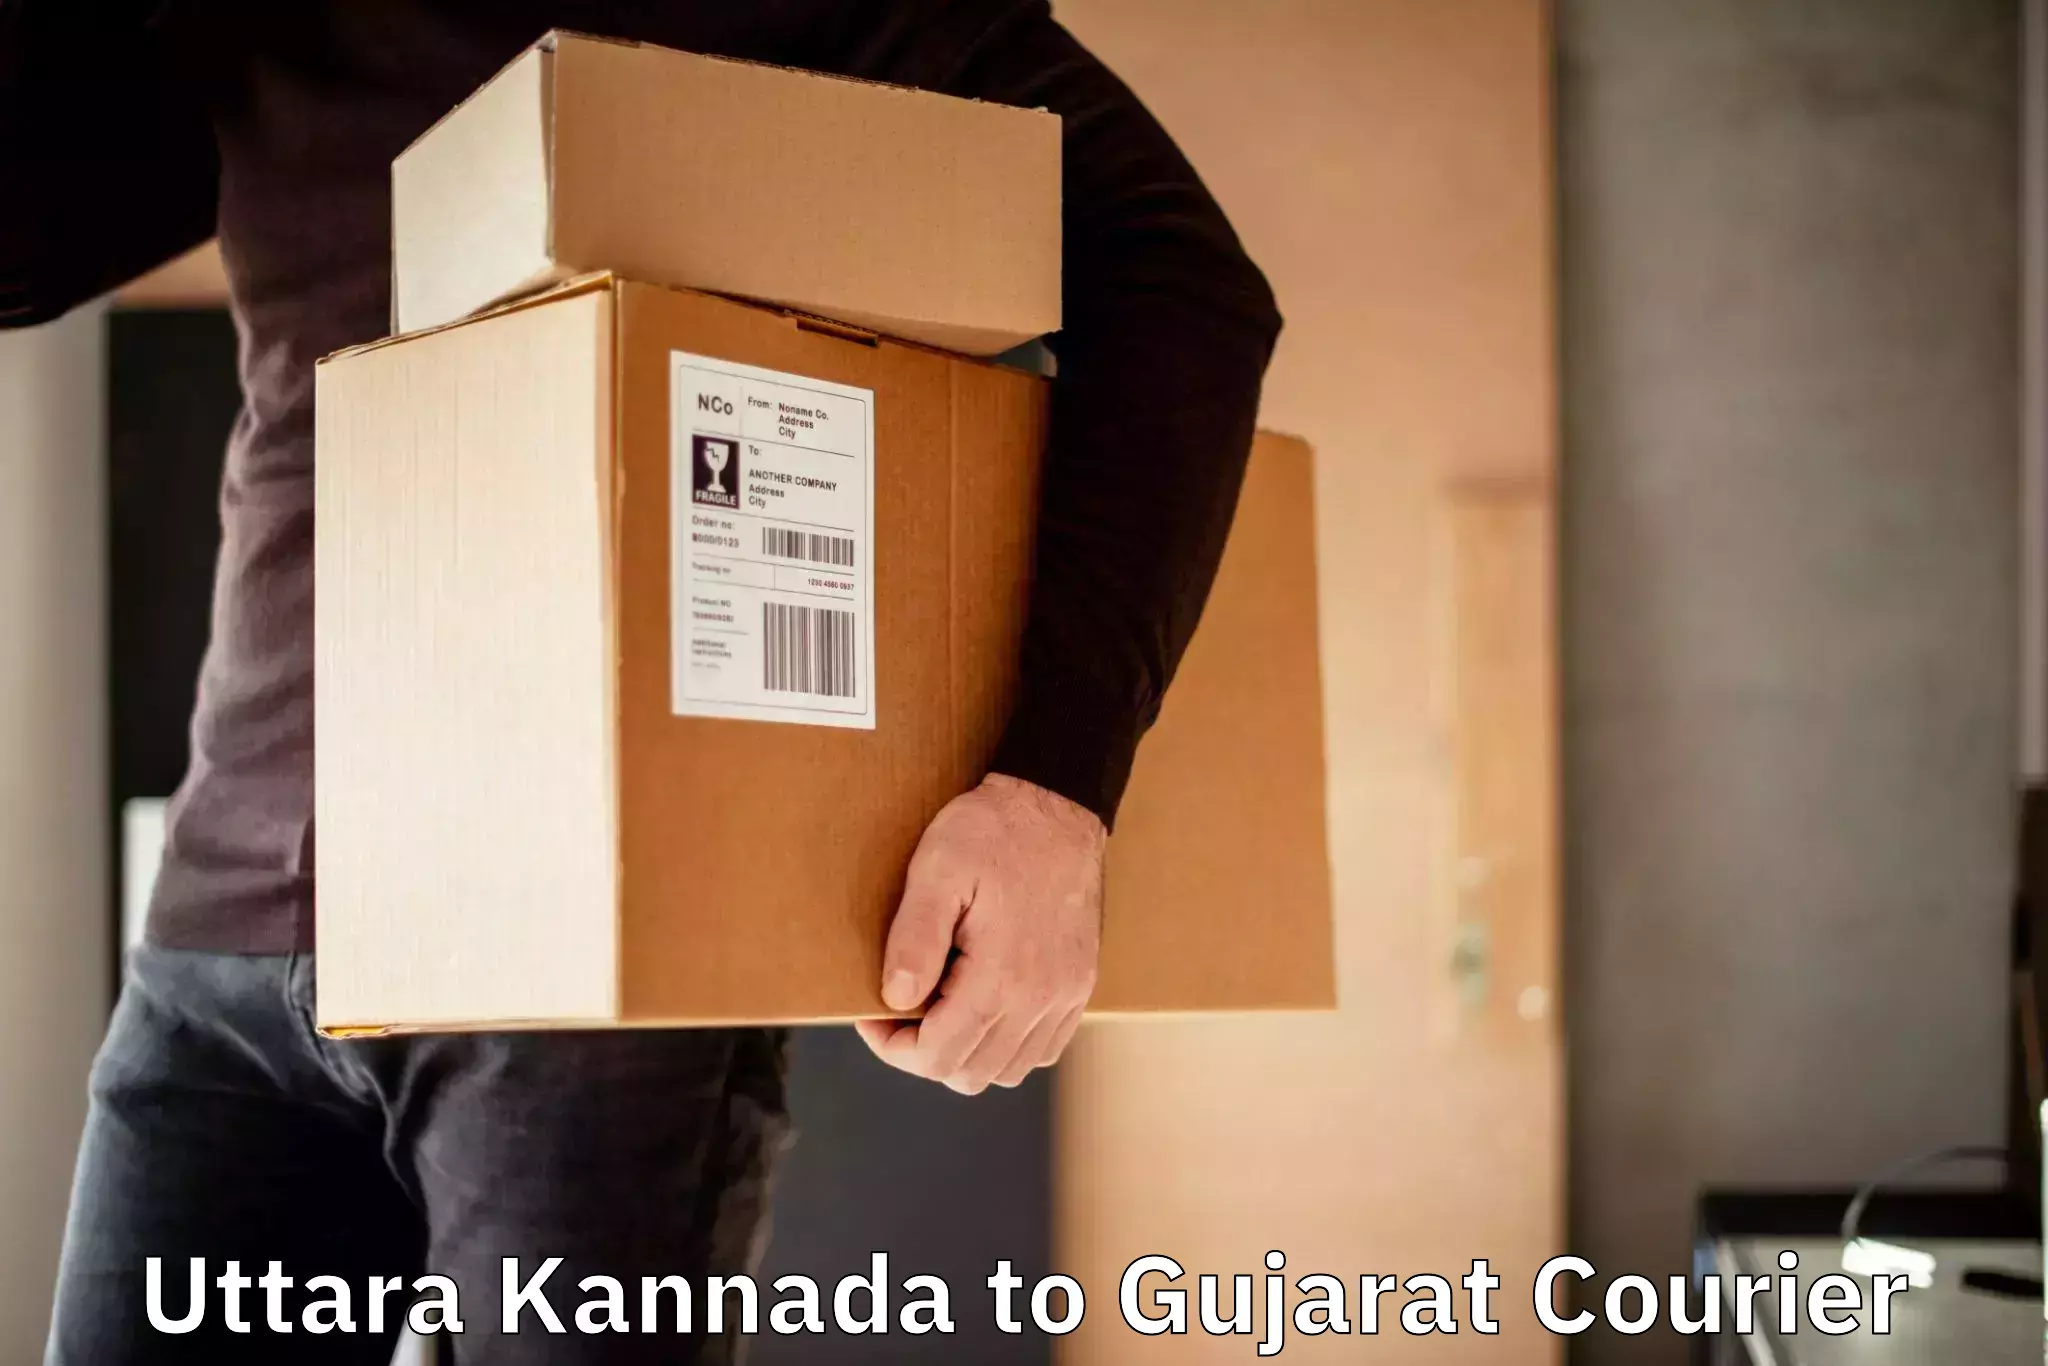 Expedited parcel delivery in Uttara Kannada to Botad